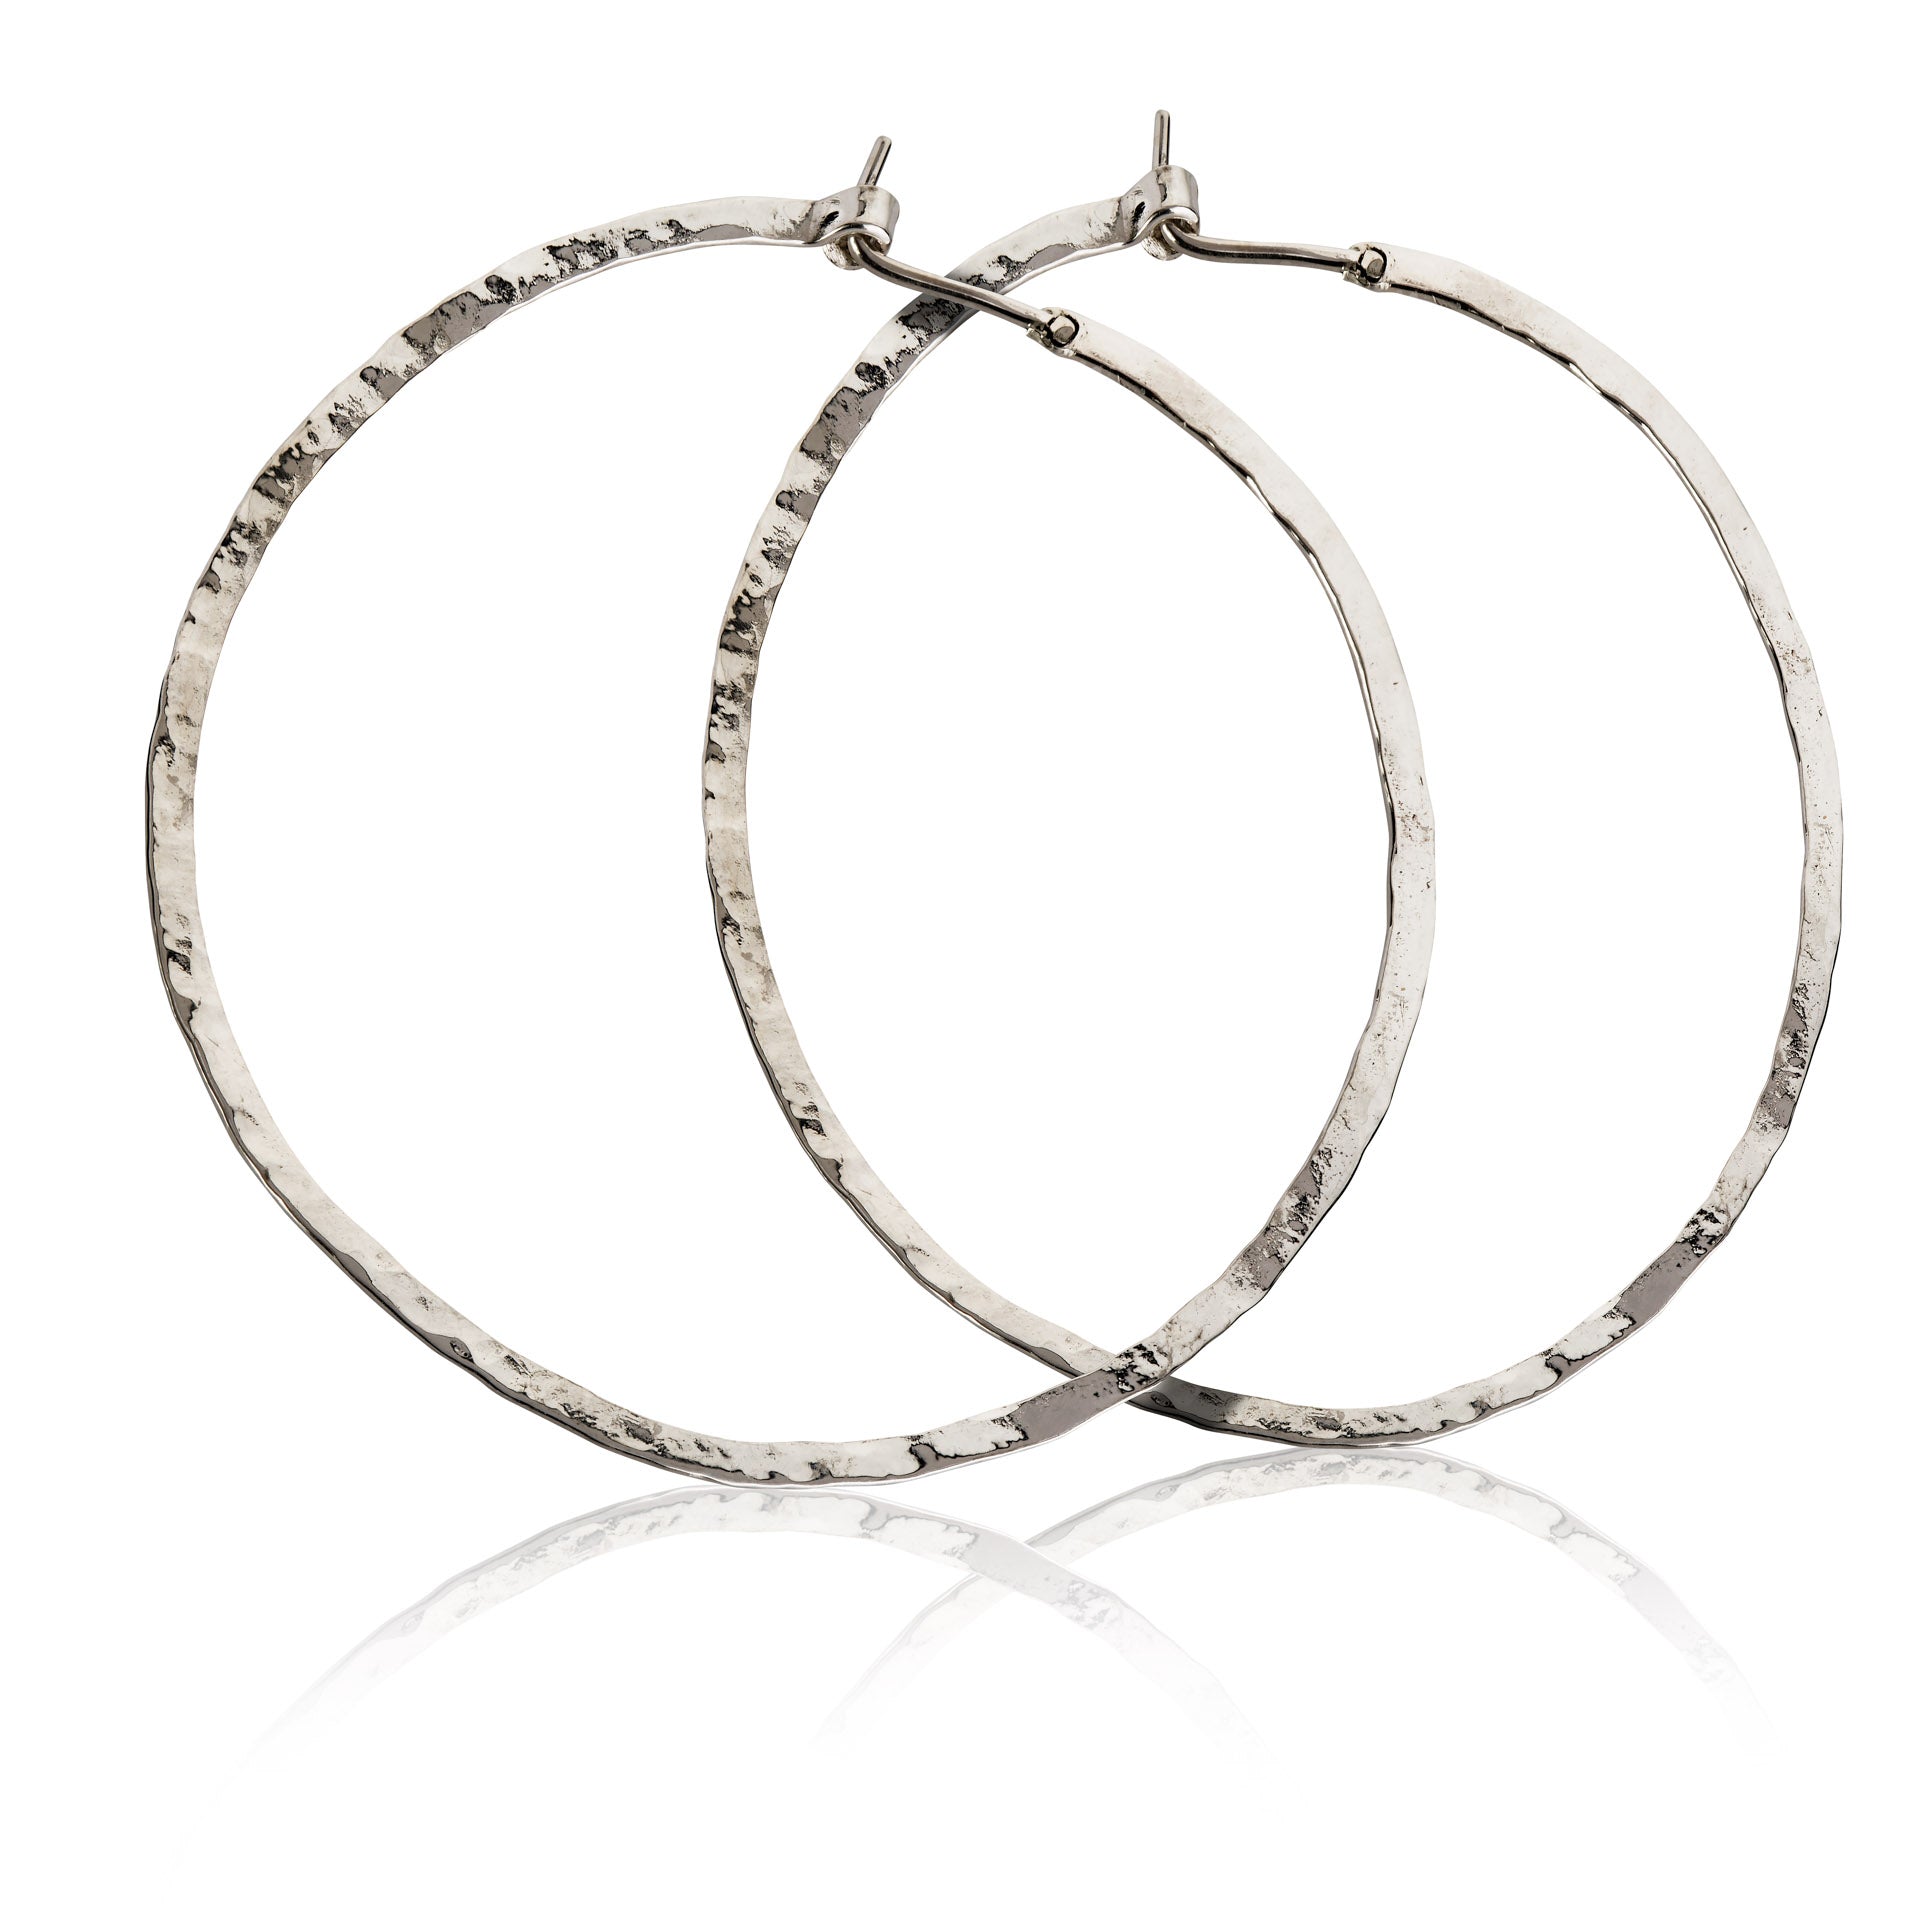 Sterling Silver Continuous Hoop Earrings - 2.5 Inch - Walmart.com